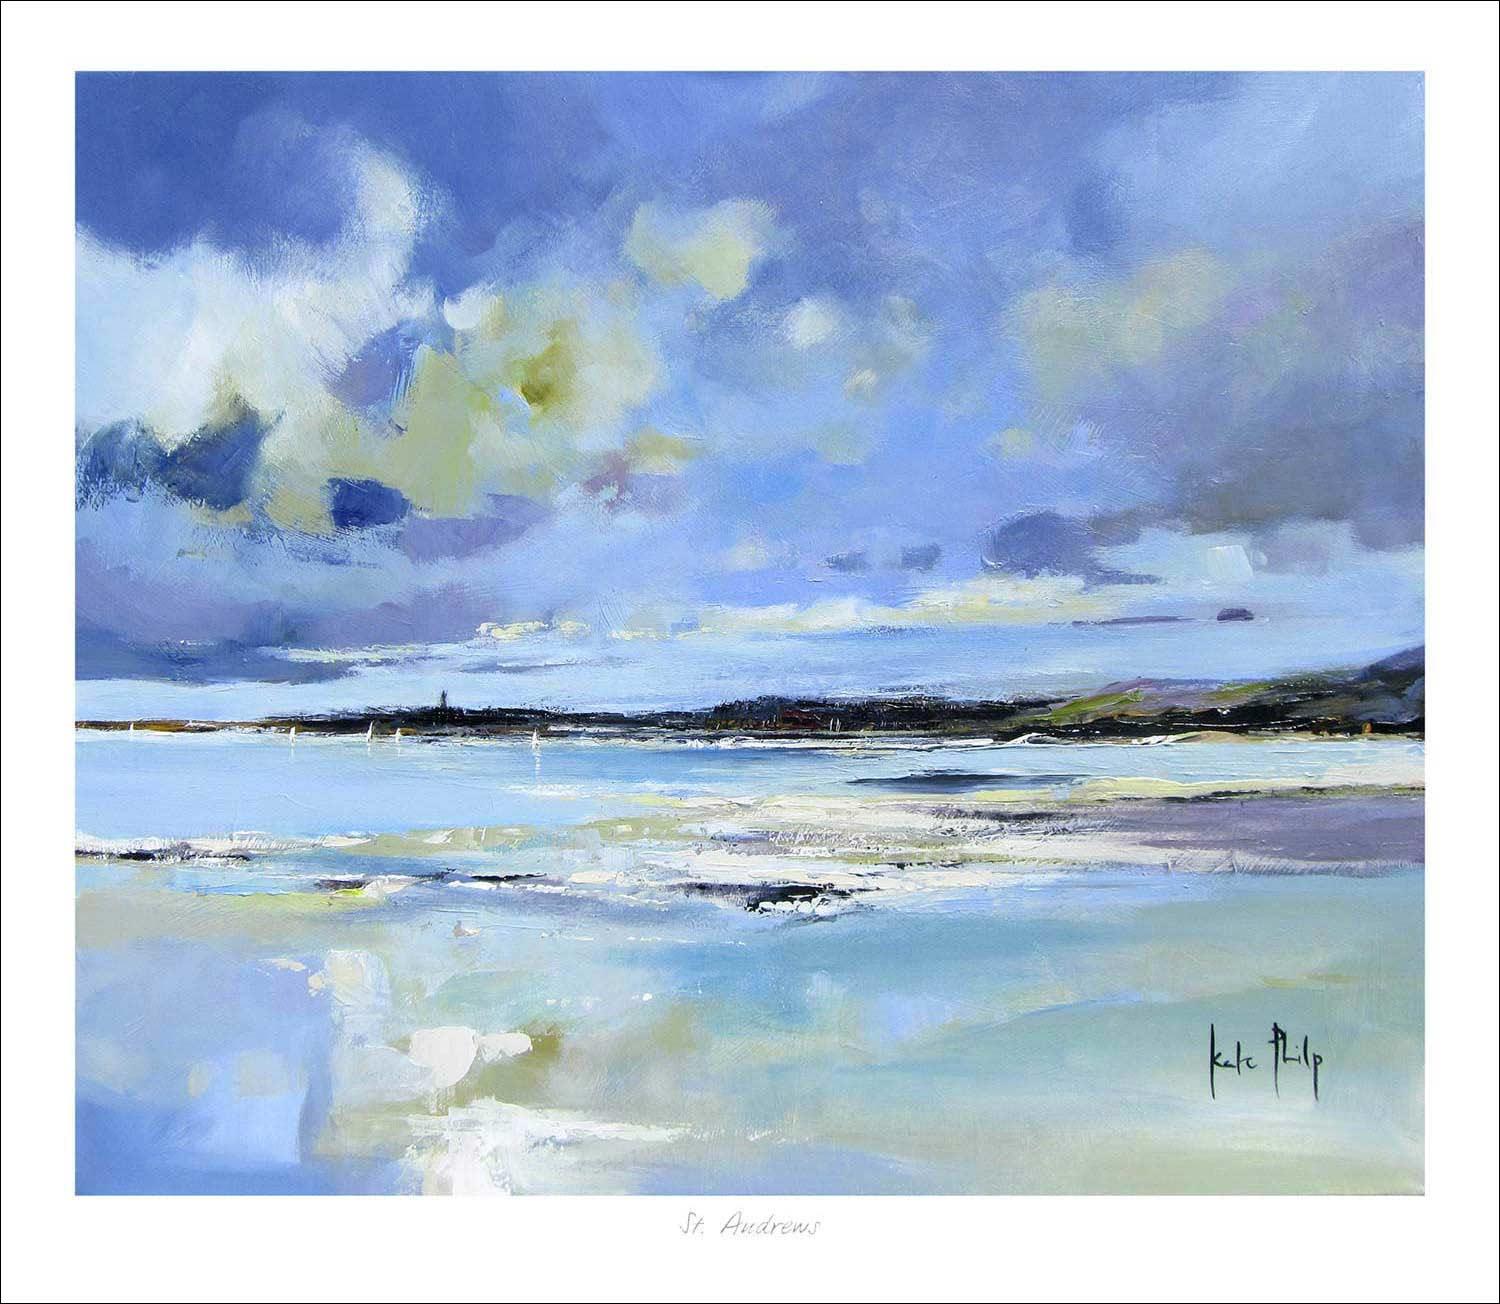 St. Andrews Art Print from an original painting by artist Kate Philp